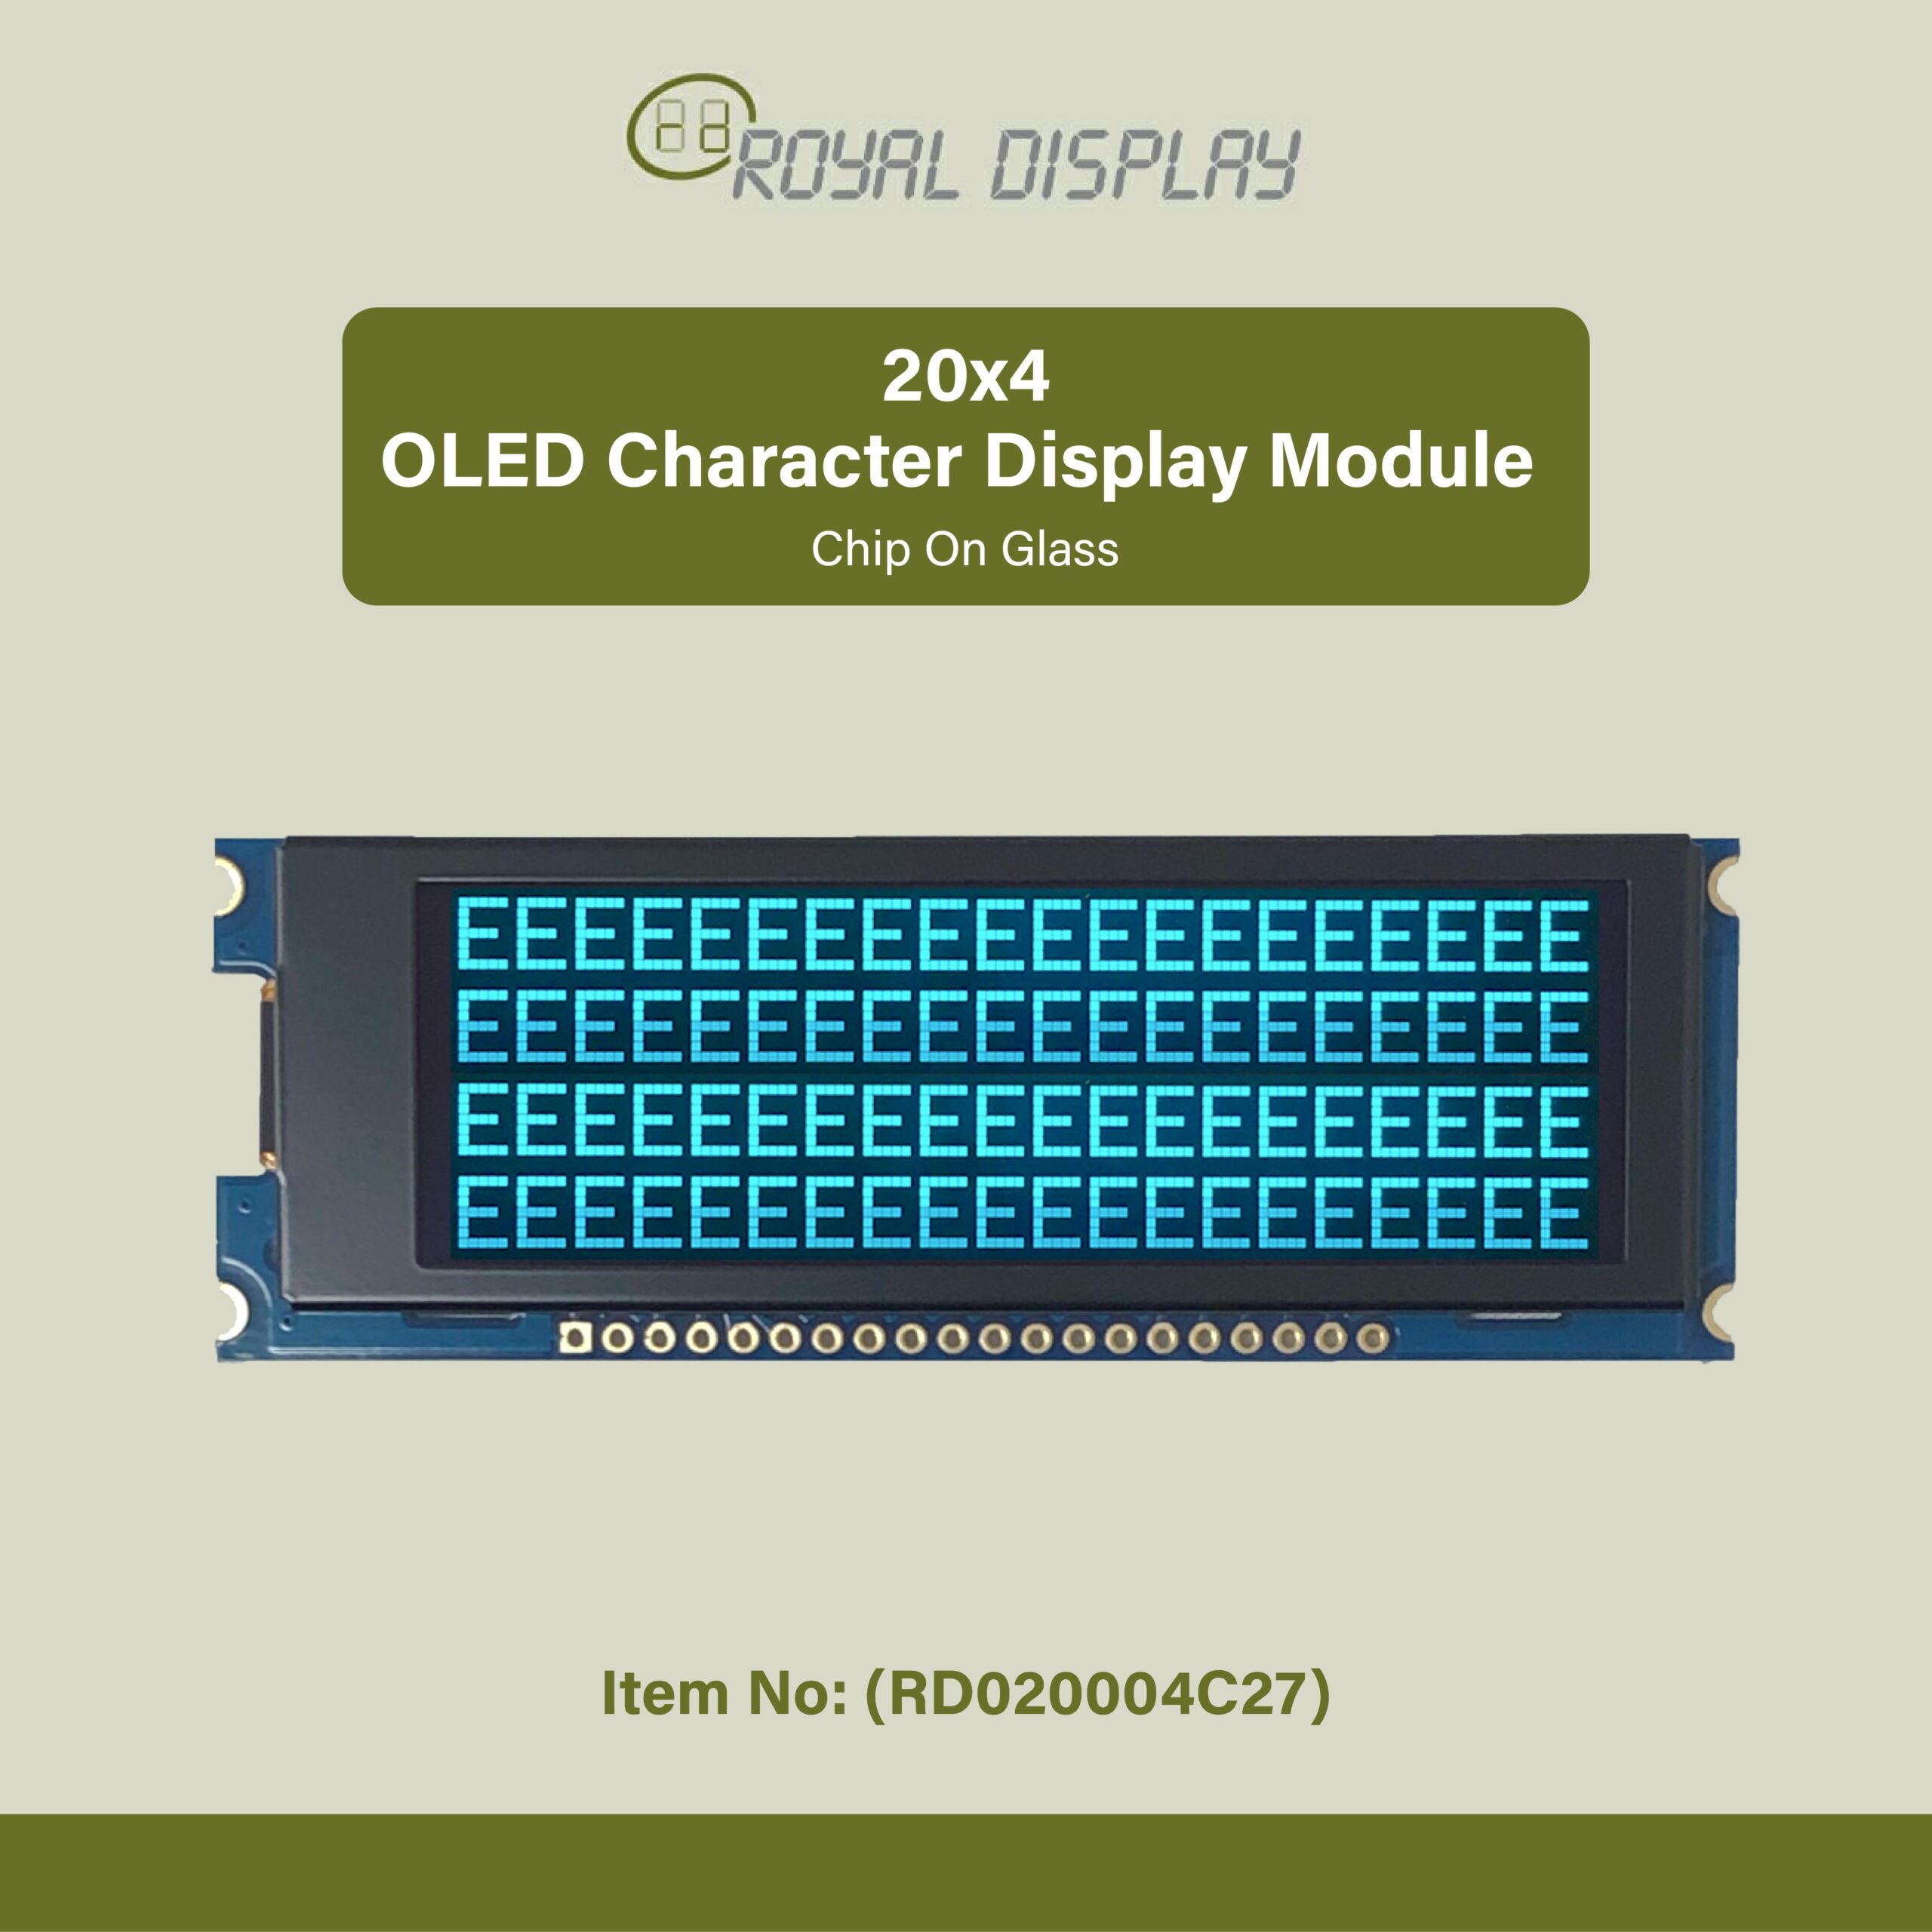 OLED Character Display Module scaled